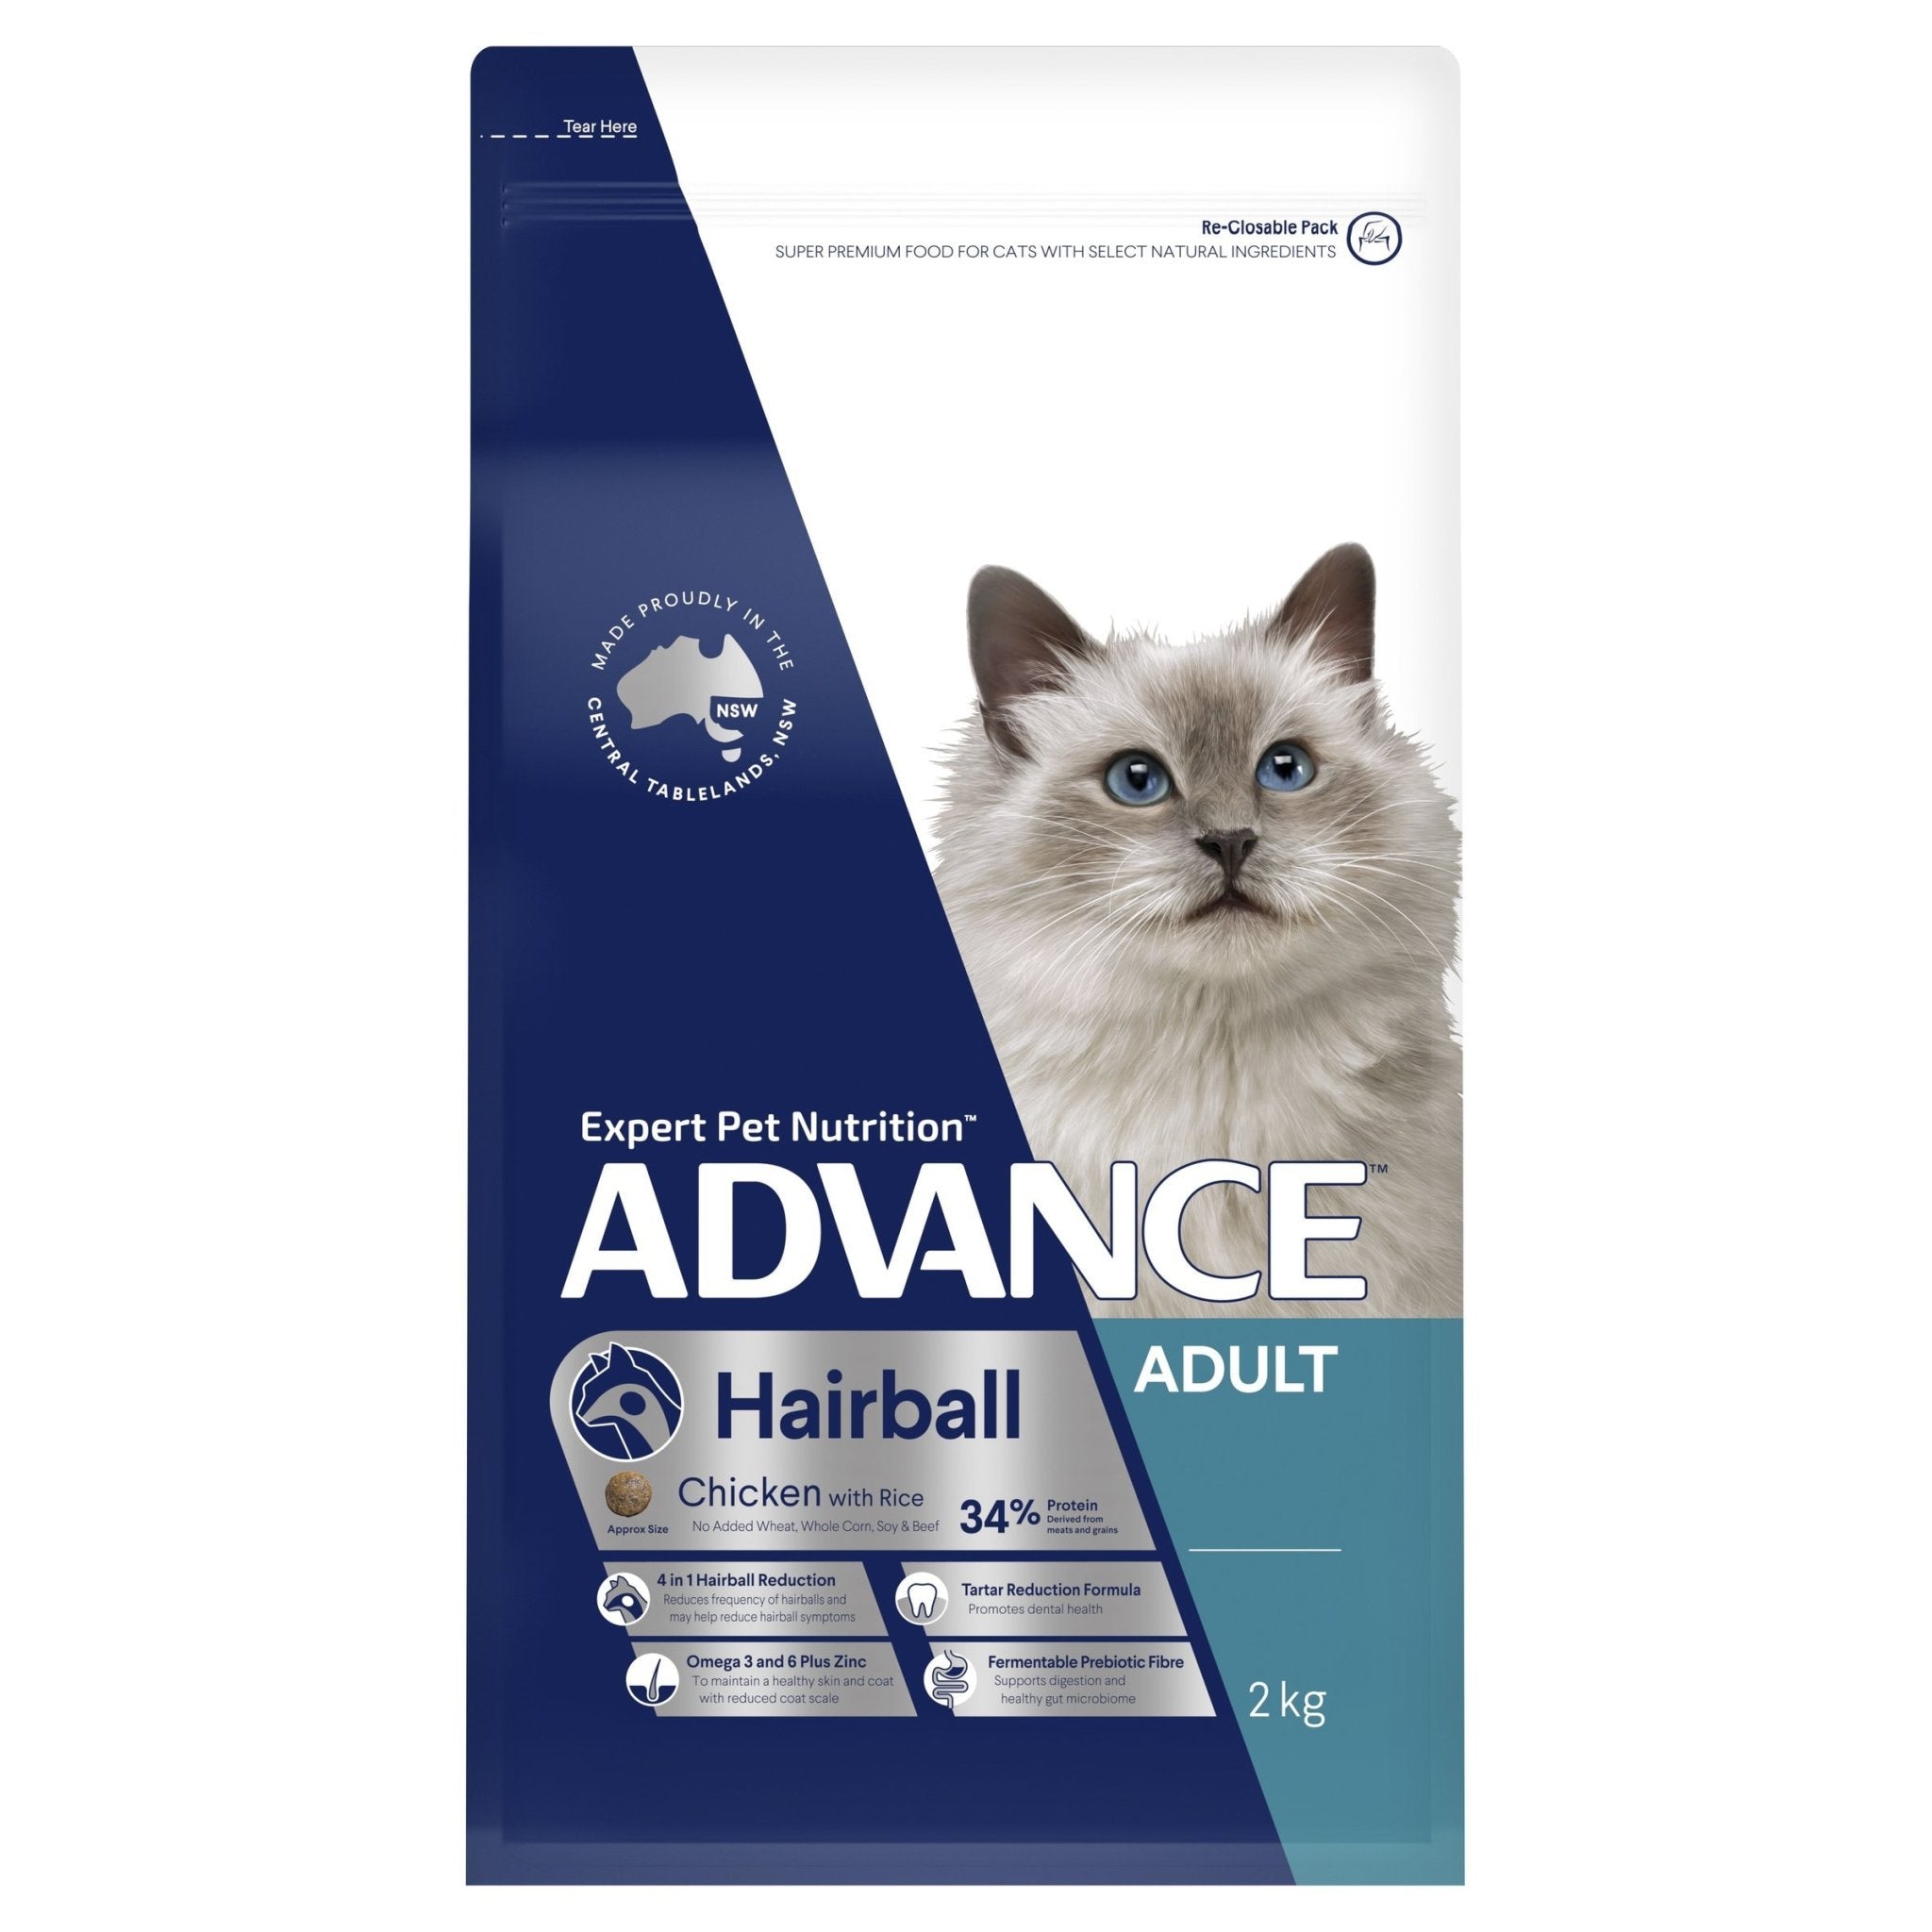 ADVANCE Hairball Adult Dry Cat Food Chicken with Rice 2kg Bag